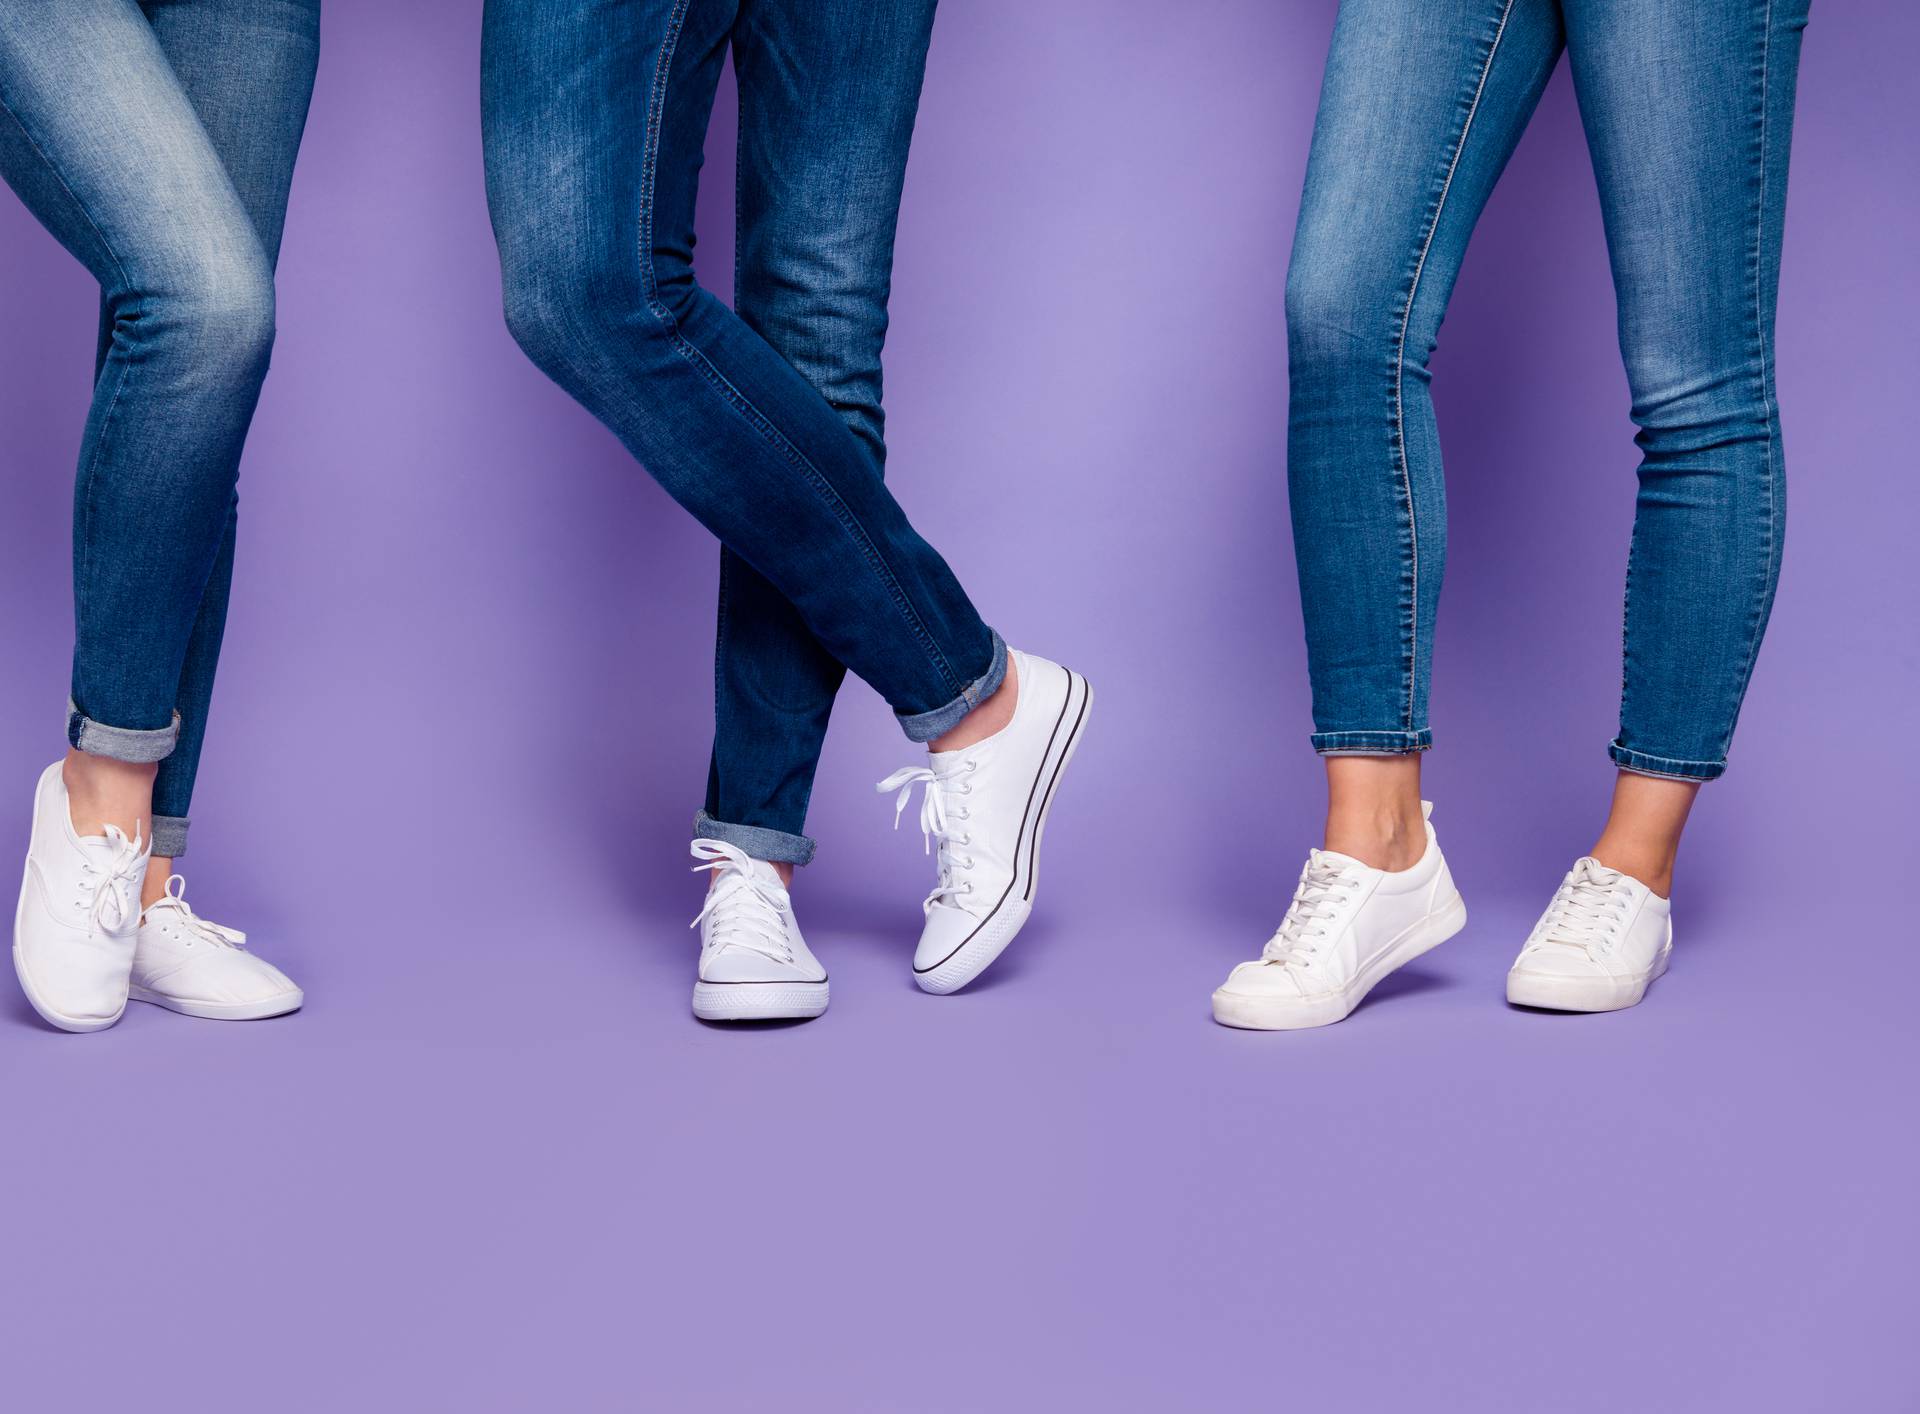 Cropped closeup photo of three people's legs wearing denim dark blue jeans trousers pants standing on the floor isolated violet background